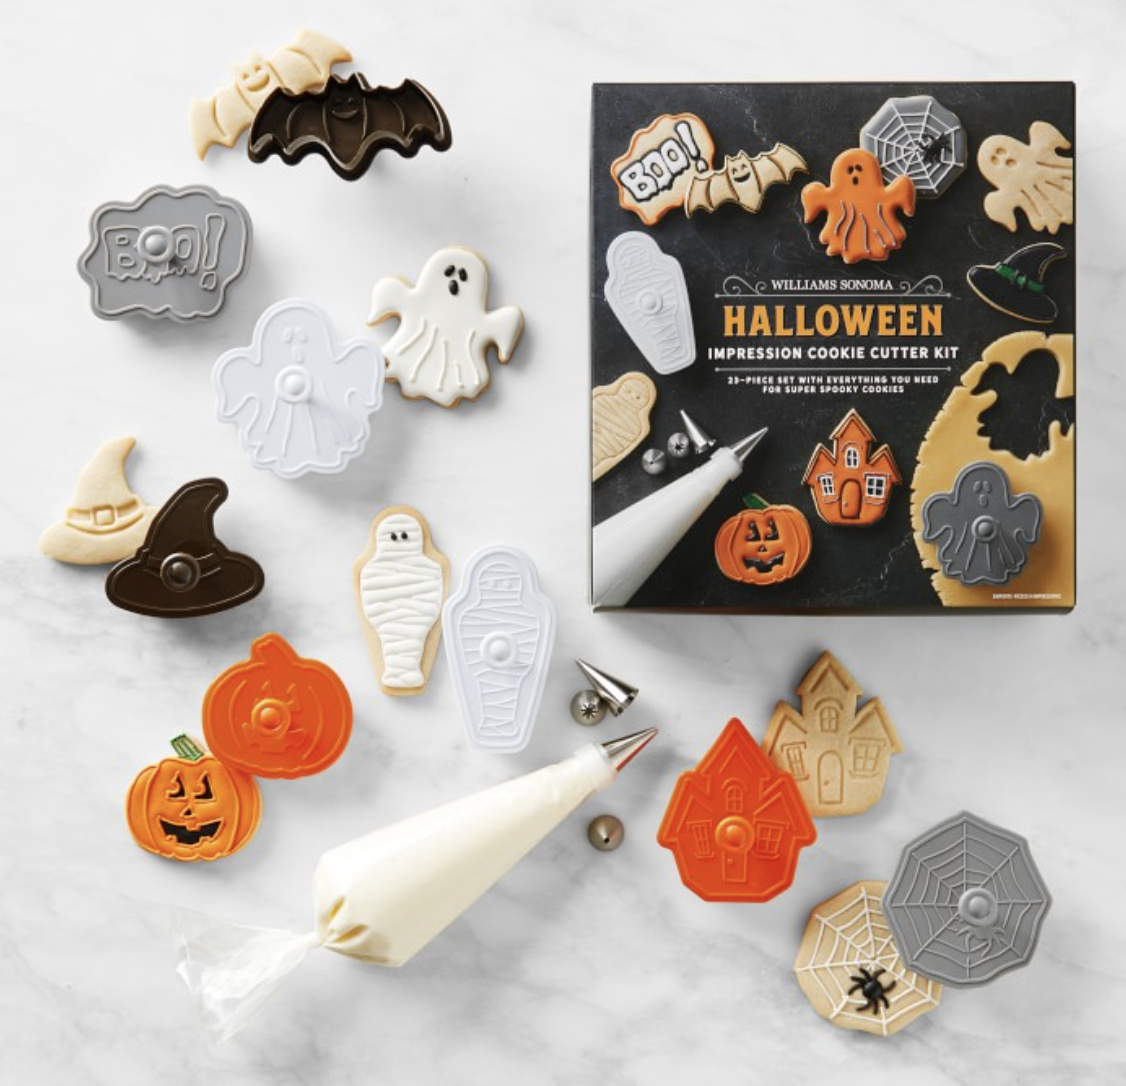 The cookie cutter kit is shown